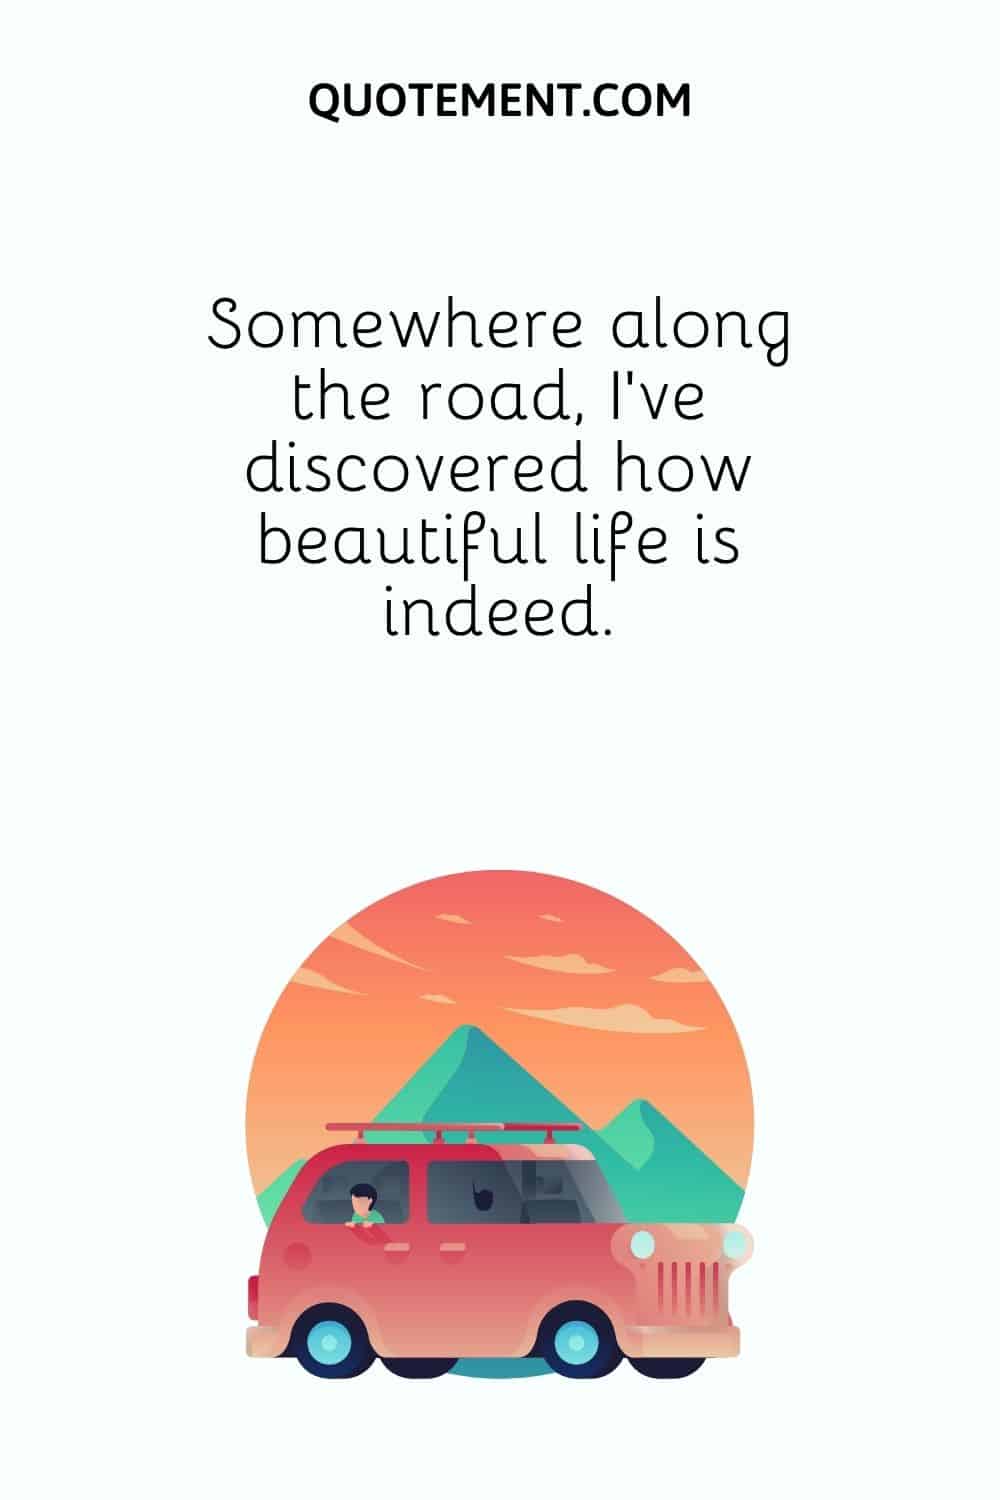 I’ve discovered how beautiful life is indeed.